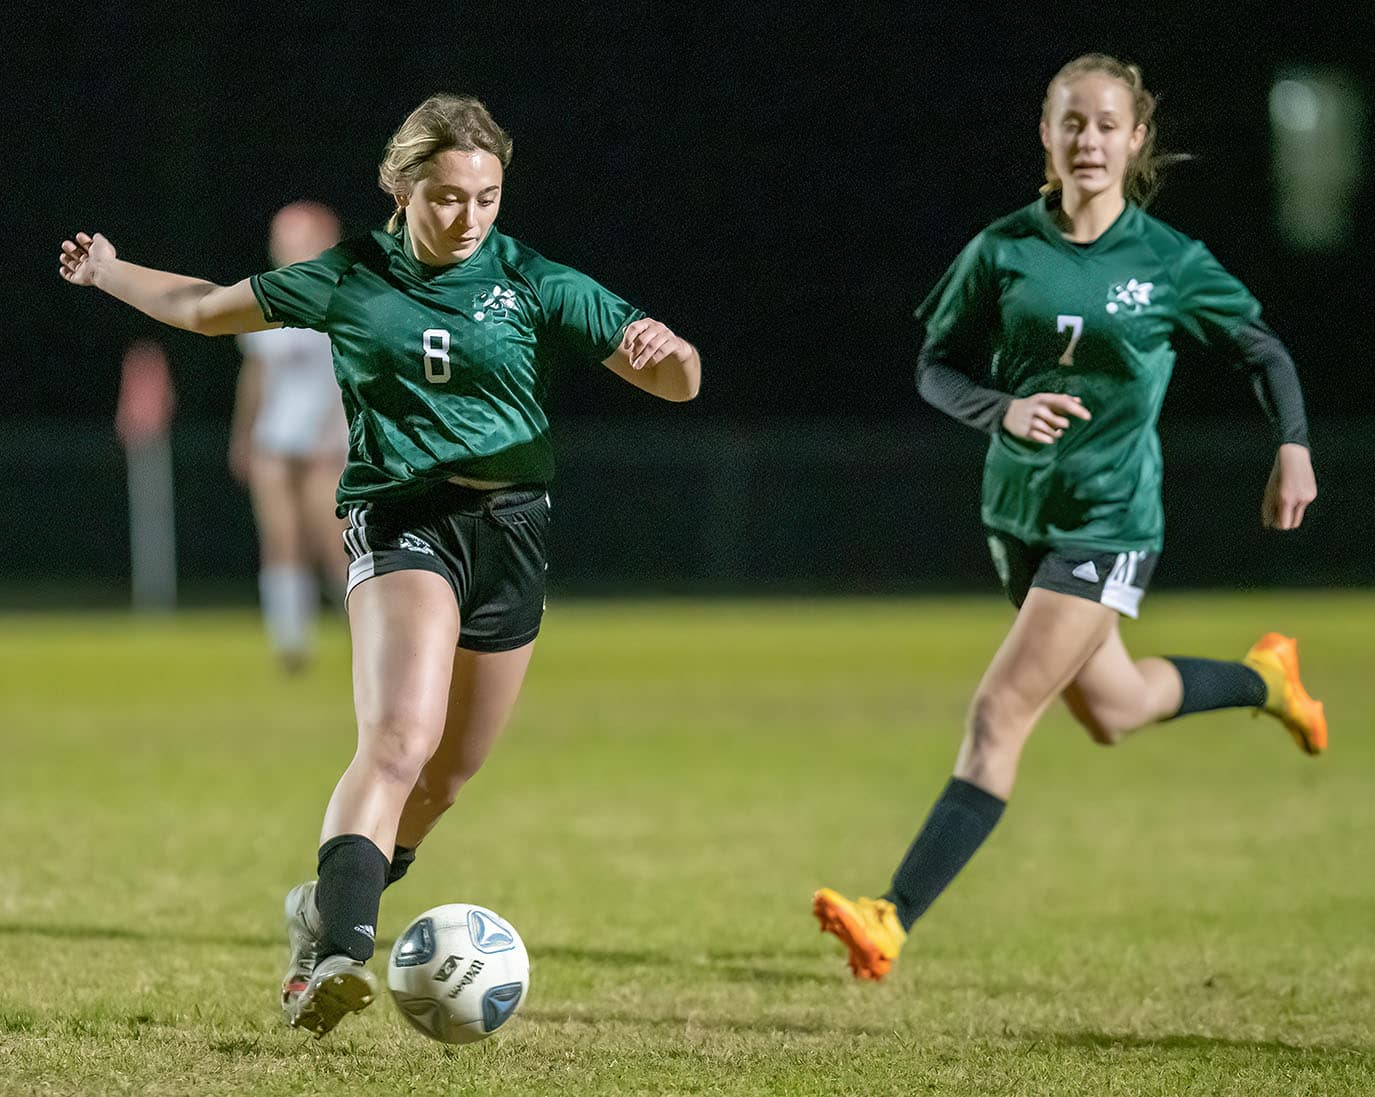 Weeki Wachee ,8, Monica Bierwith makes sure to clear a loose ball during the game with Springstead. Lola Northrup ,7, follows the play. Photo by JOE DiCRISTOFALO